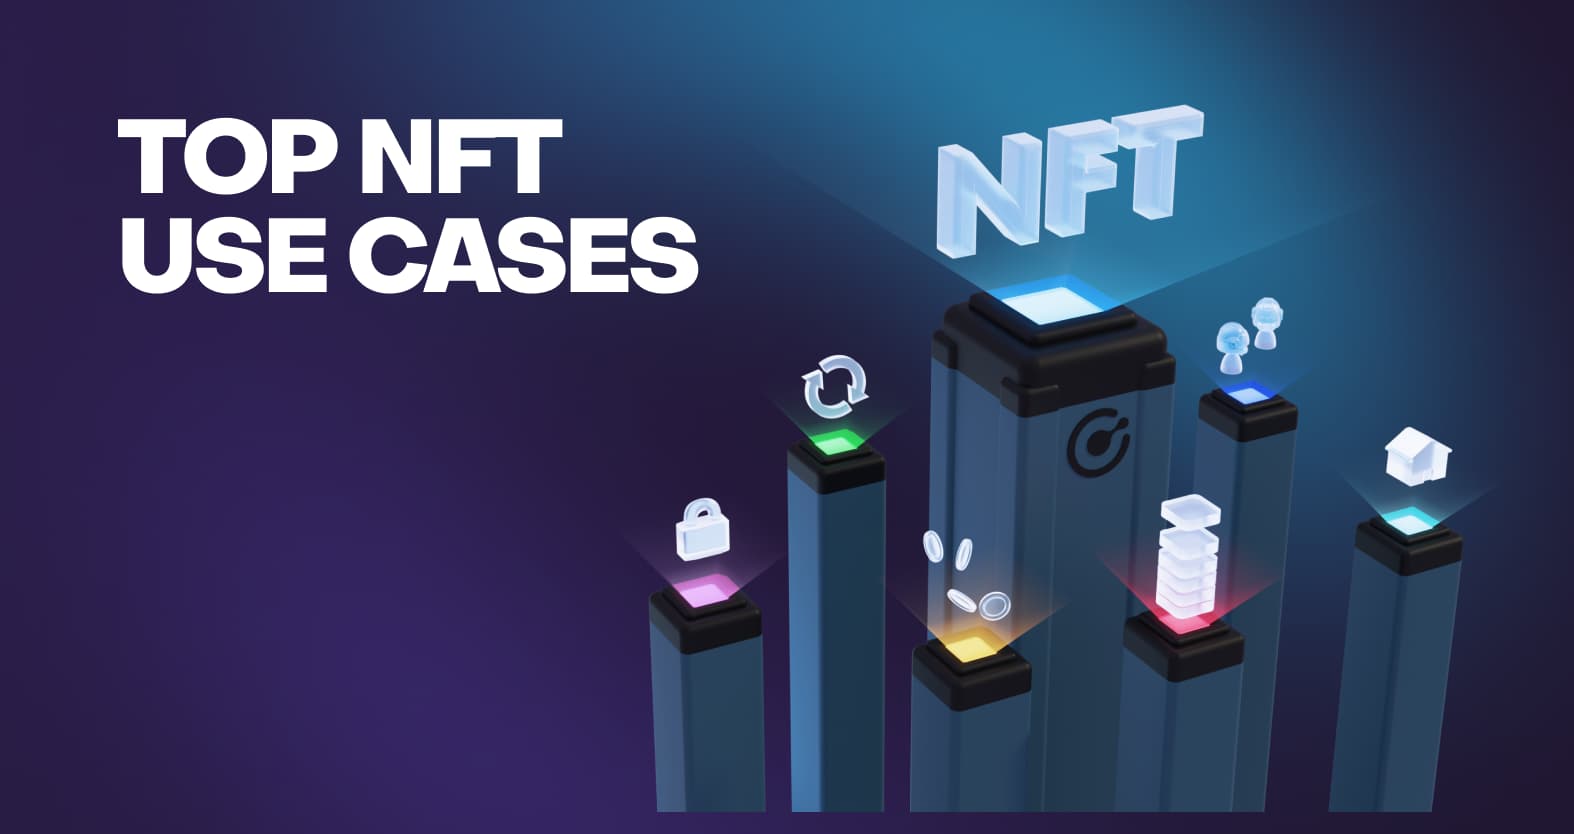 Top 7 NFT Use Cases